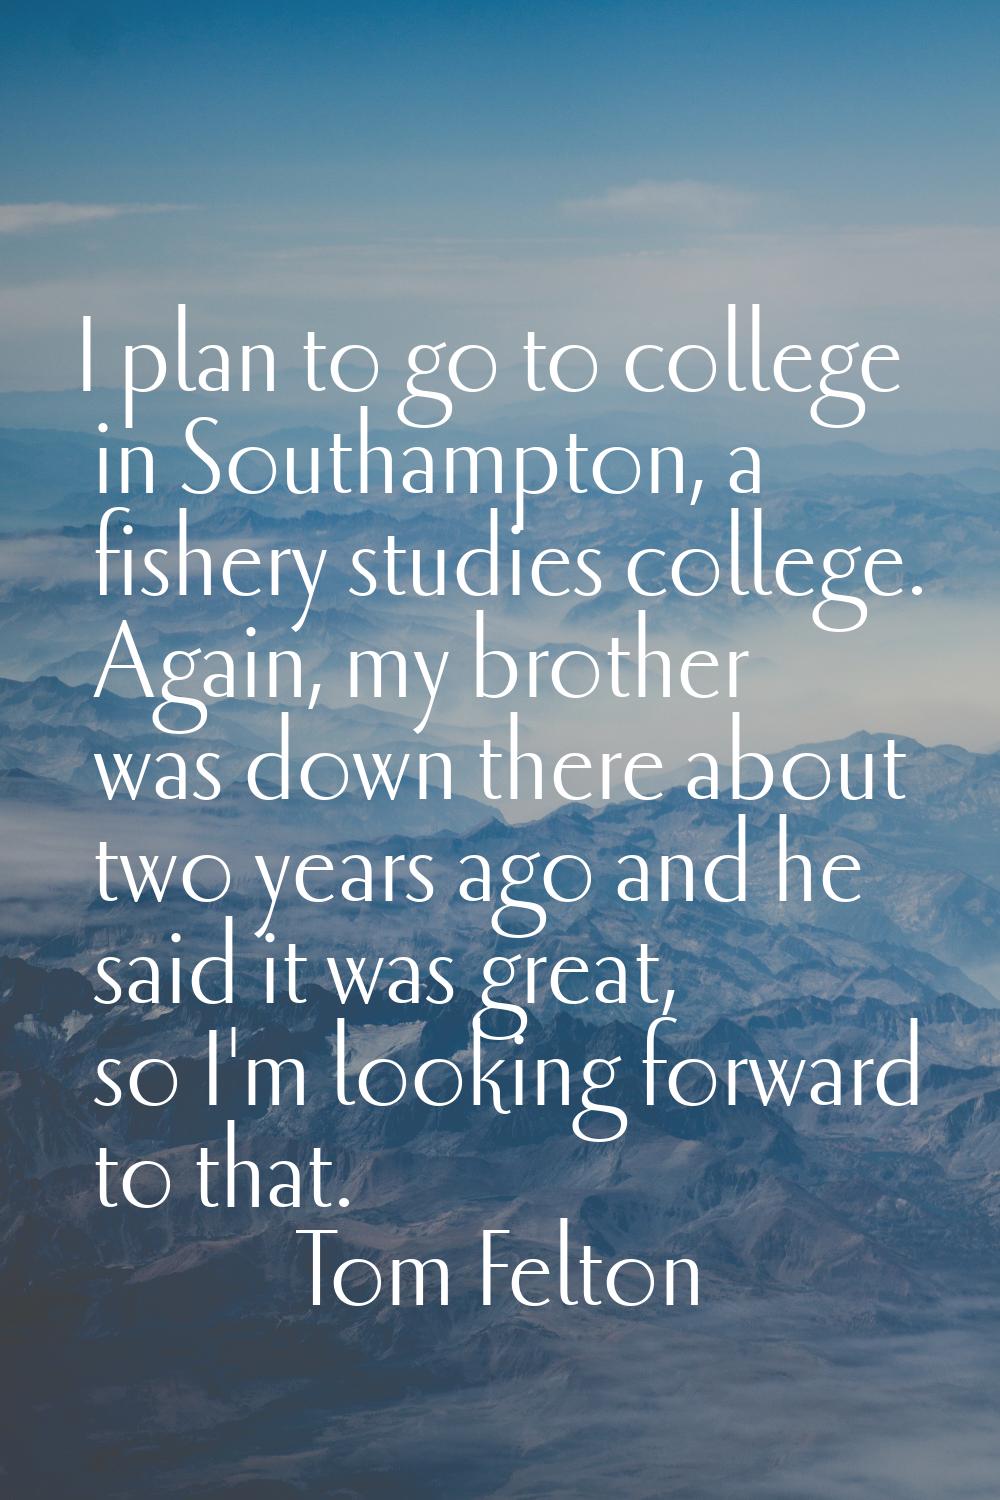 I plan to go to college in Southampton, a fishery studies college. Again, my brother was down there